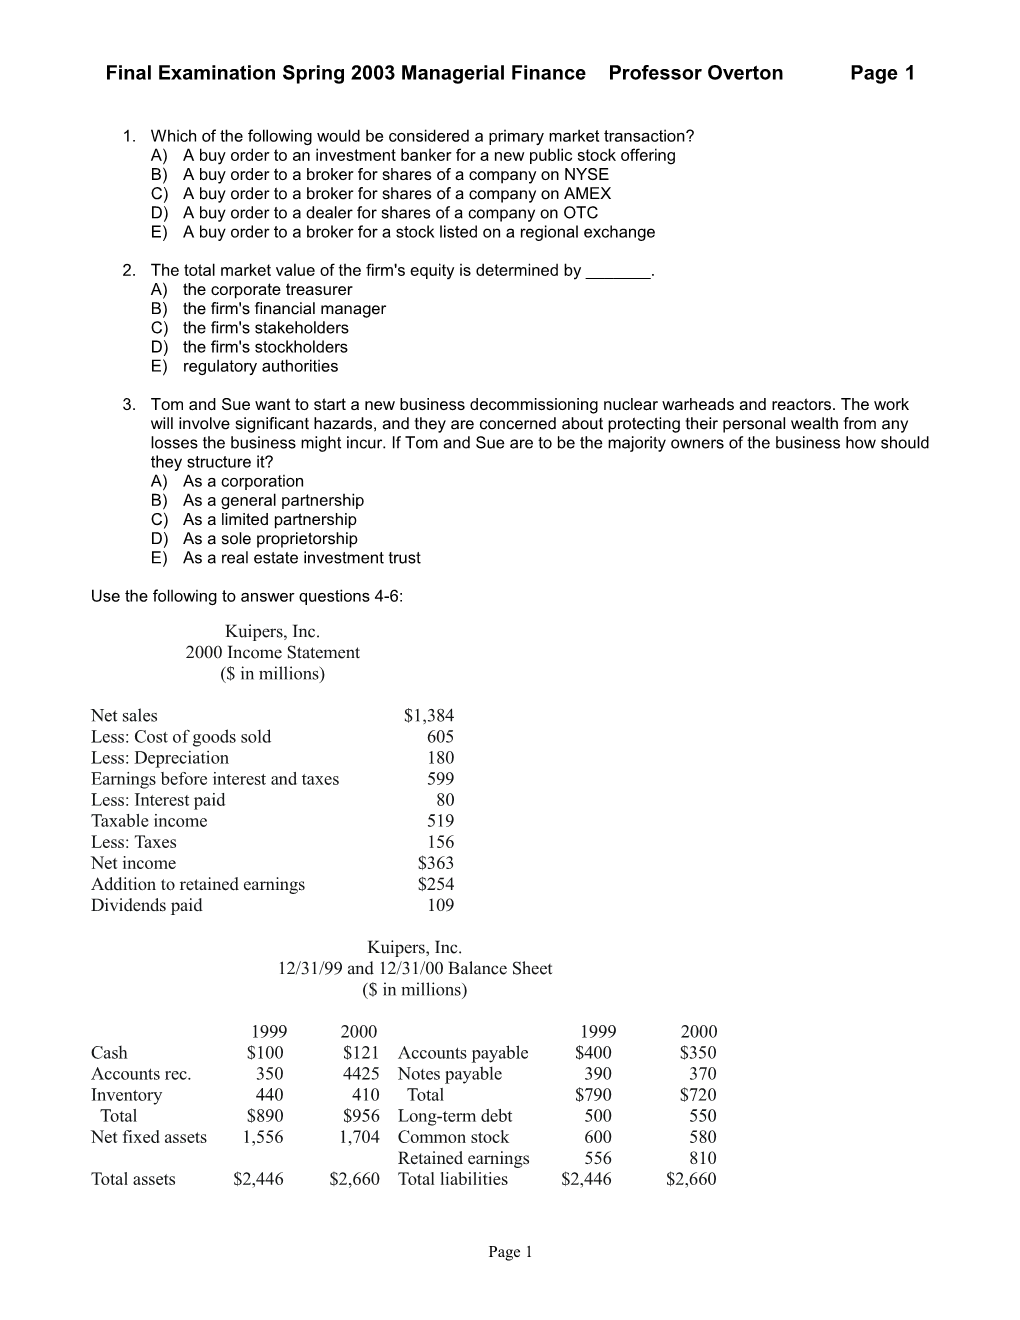 Final Examination Spring 2003 Managerial Finance Professor Overton Page 1